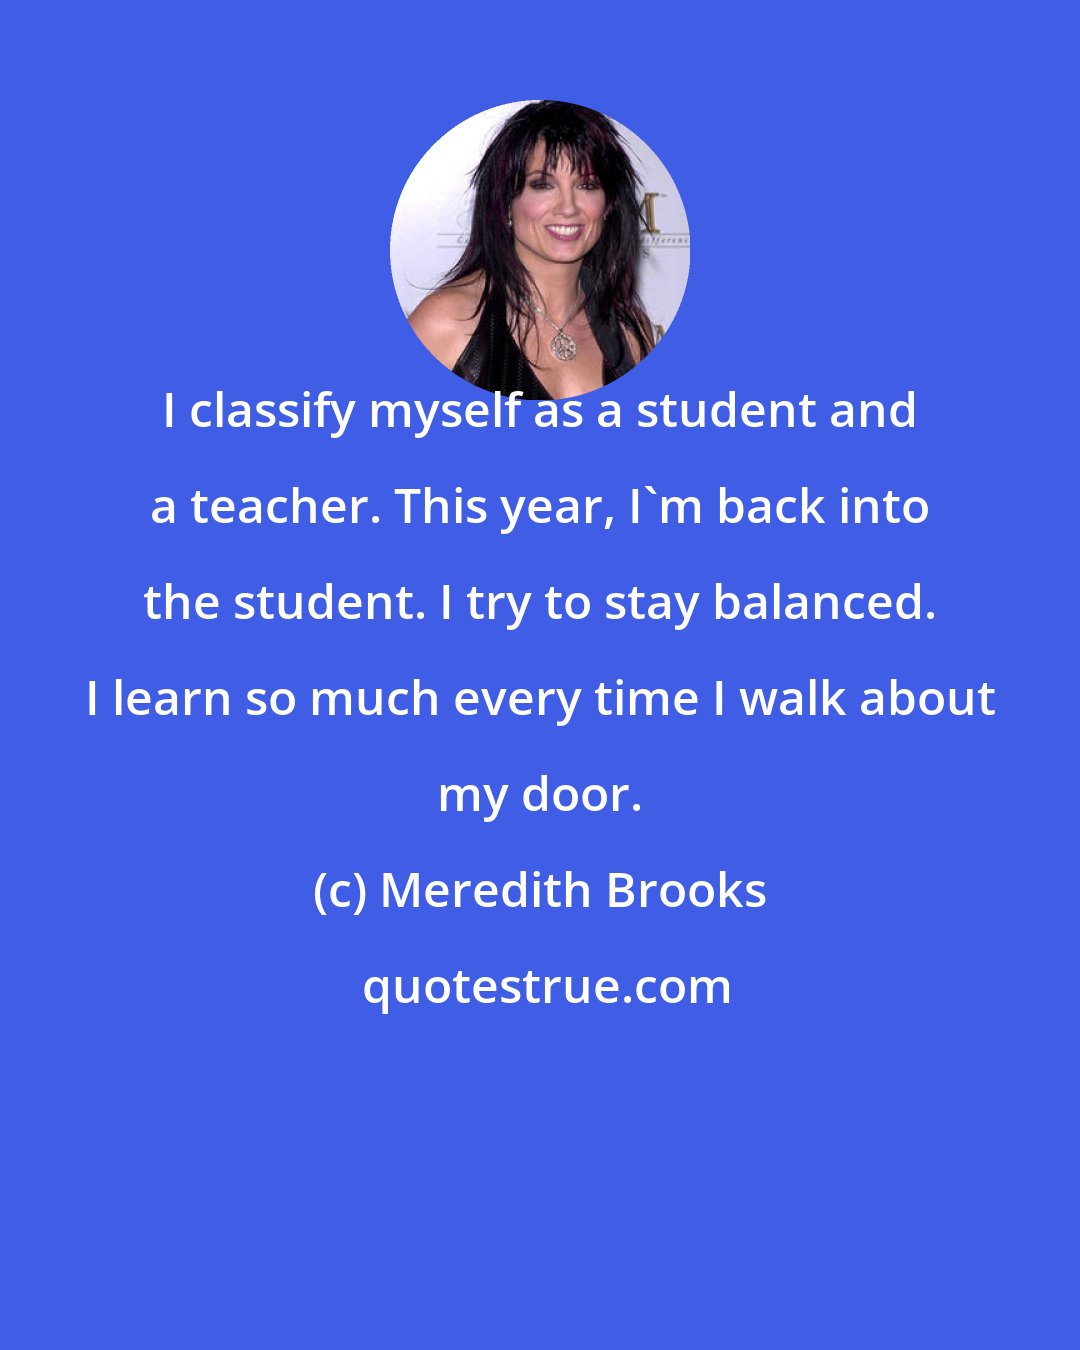 Meredith Brooks: I classify myself as a student and a teacher. This year, I'm back into the student. I try to stay balanced. I learn so much every time I walk about my door.